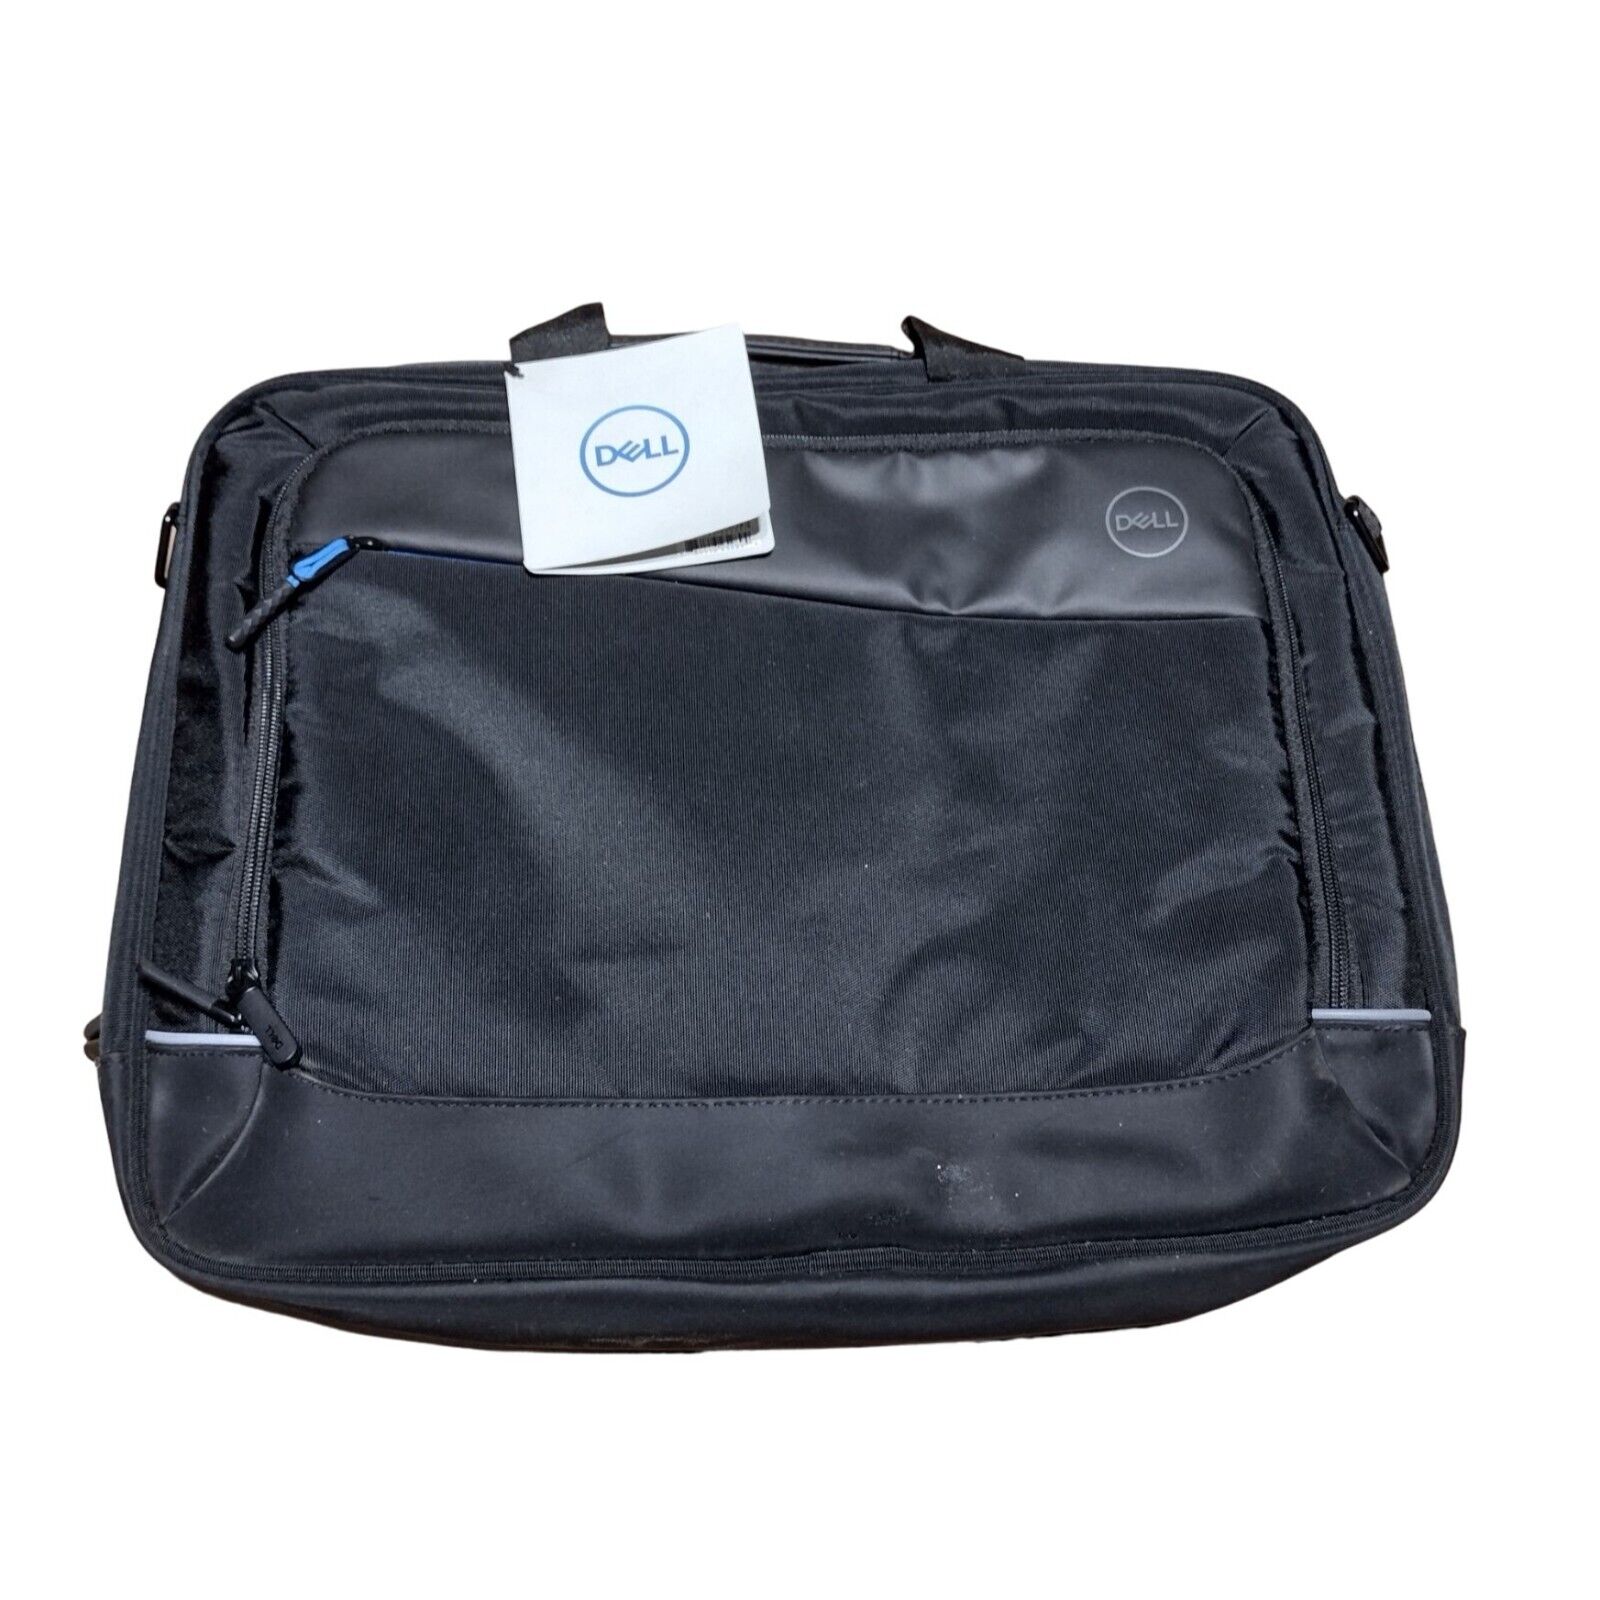 Dell Professional Briefcase 15 Black Polyester